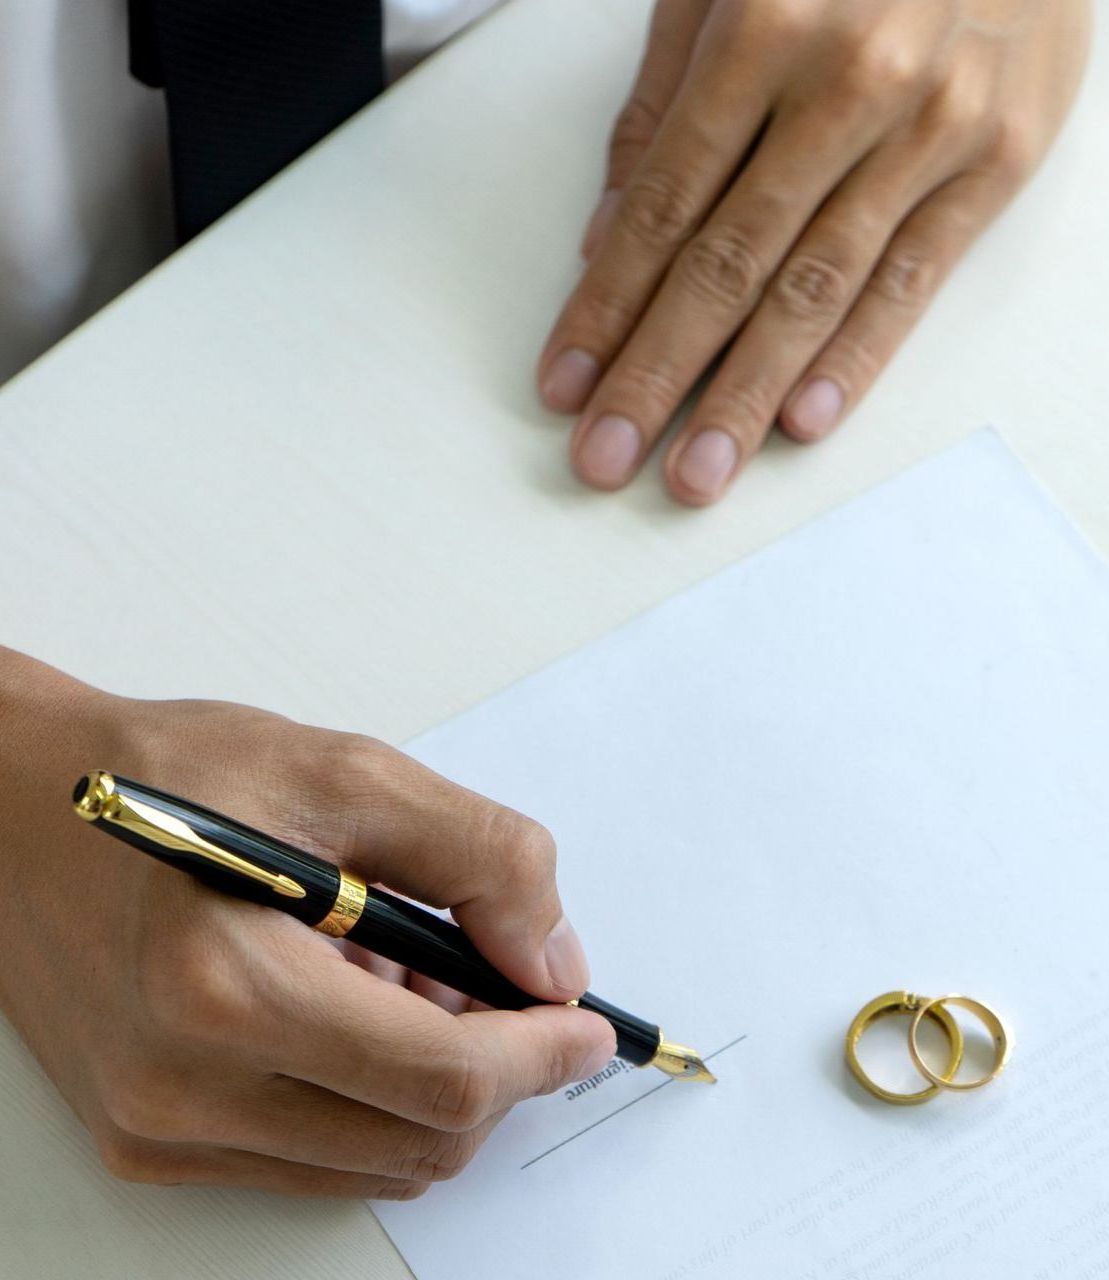 A person is writing on a piece of paper next to a pair of wedding rings.